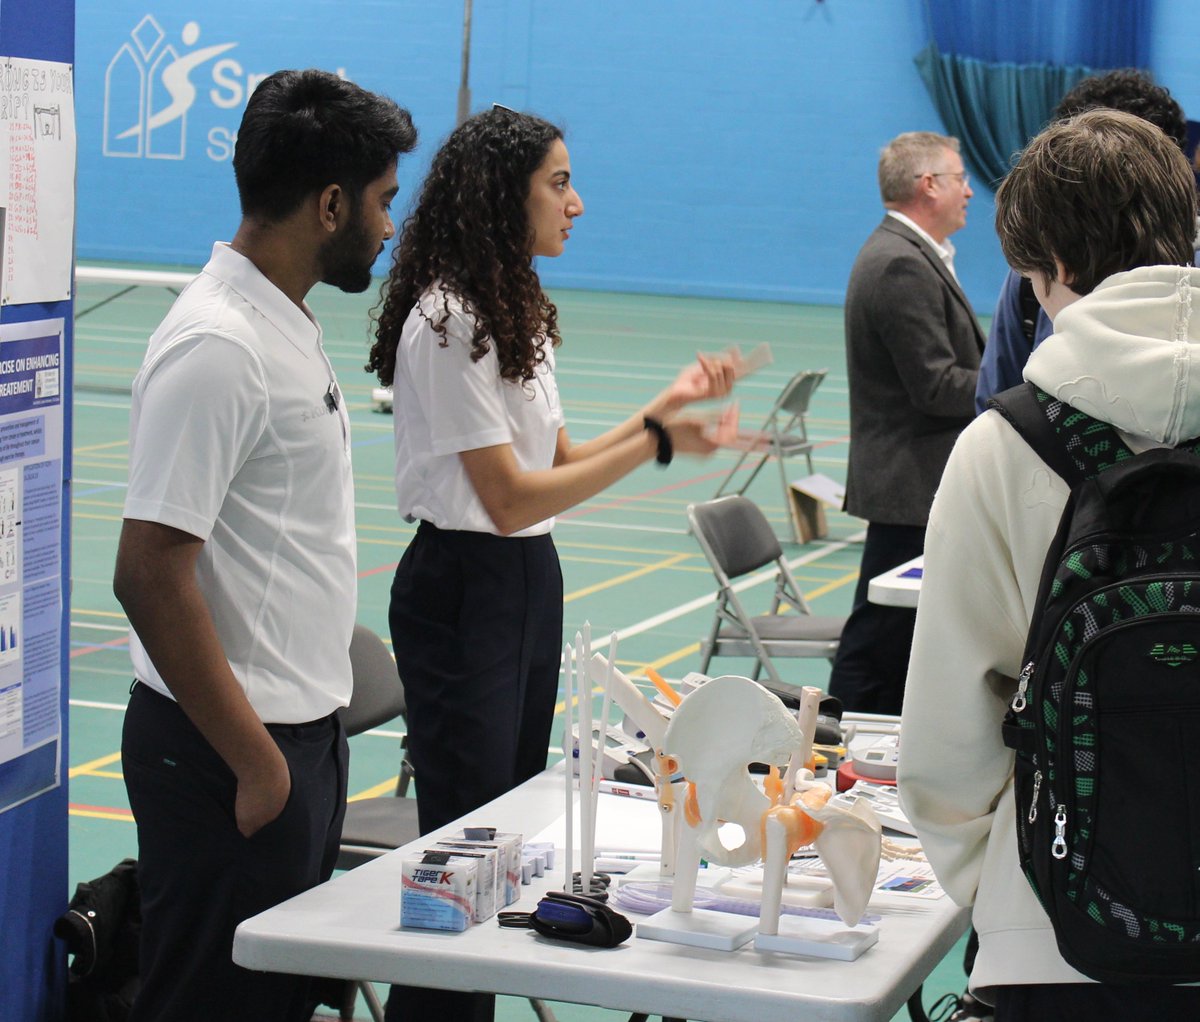 Honoured to have led #britishscienceweek for the Faculty of STHS @YourStMarys - Huge thanks to all staff, @platoscience  and @magstimTMS for the inspiring demonstrations and to @OrleansPark @WaldegraveSch for the brilliant engagement and participation! #BSW24  #STEM